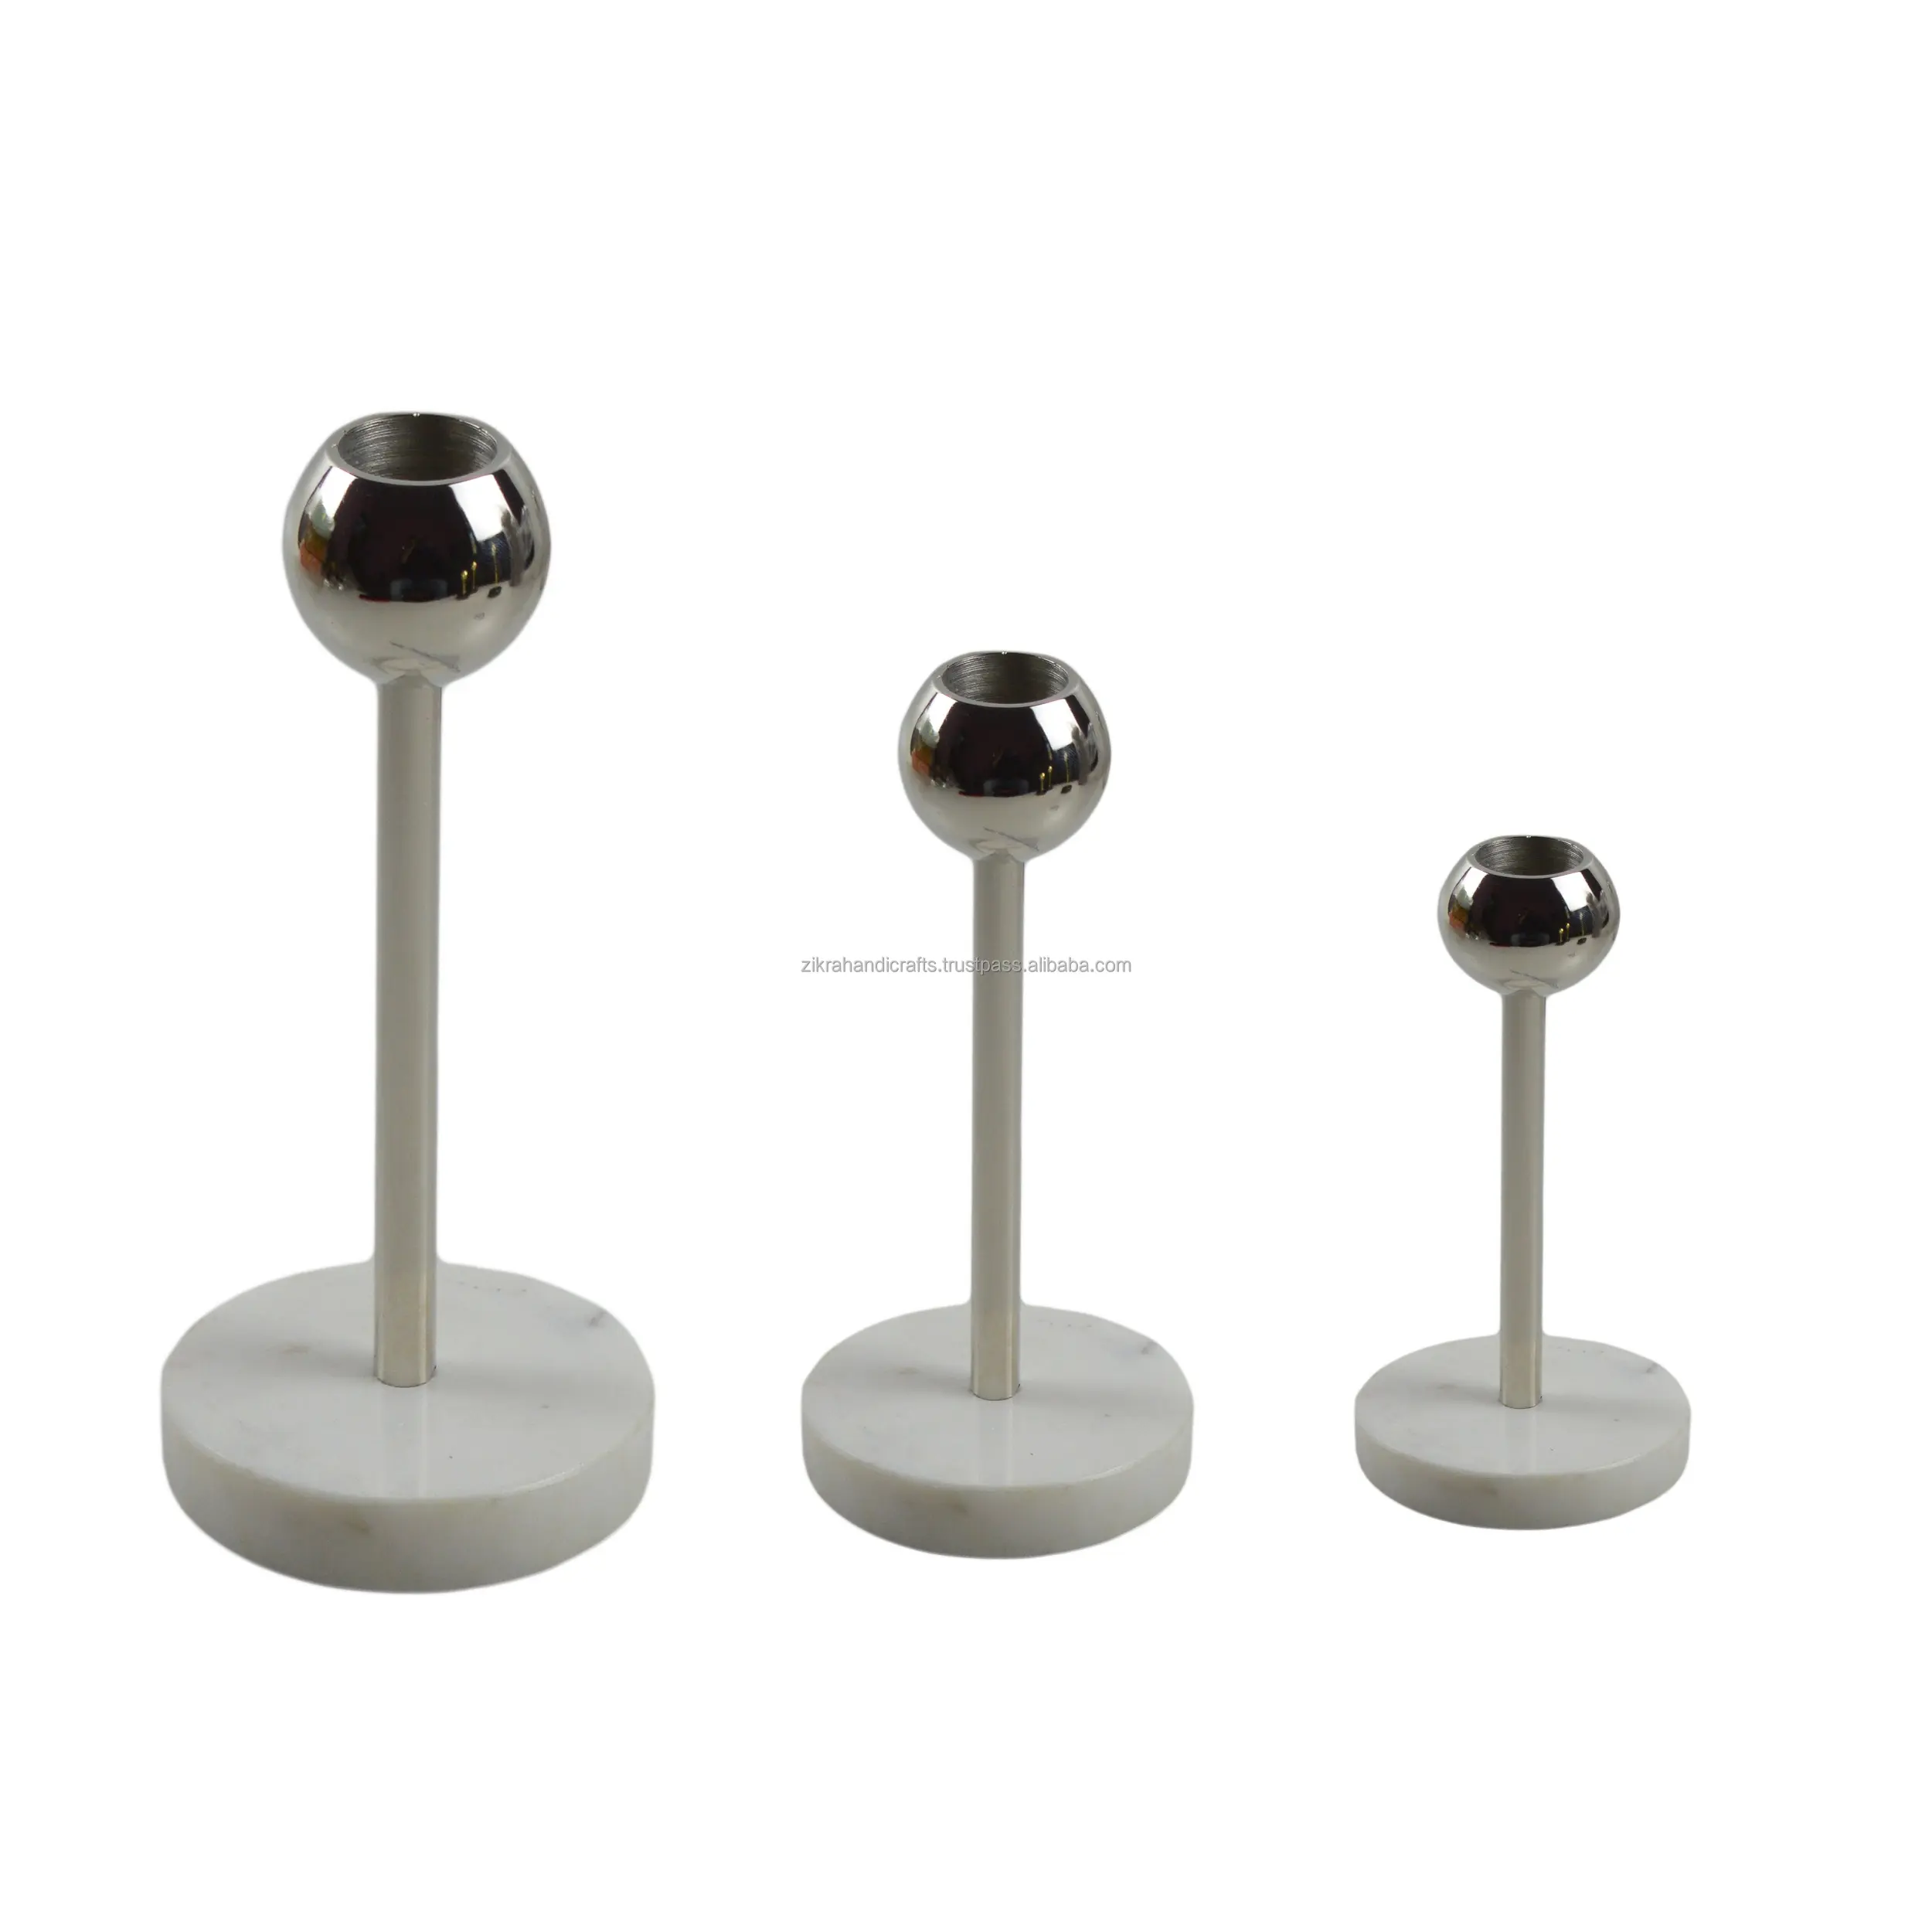 Natural Base Design Candle Stick Holders Plated Finishing Candle Stand Home Dinner And Wedding Centerpiece Design Candle Holder